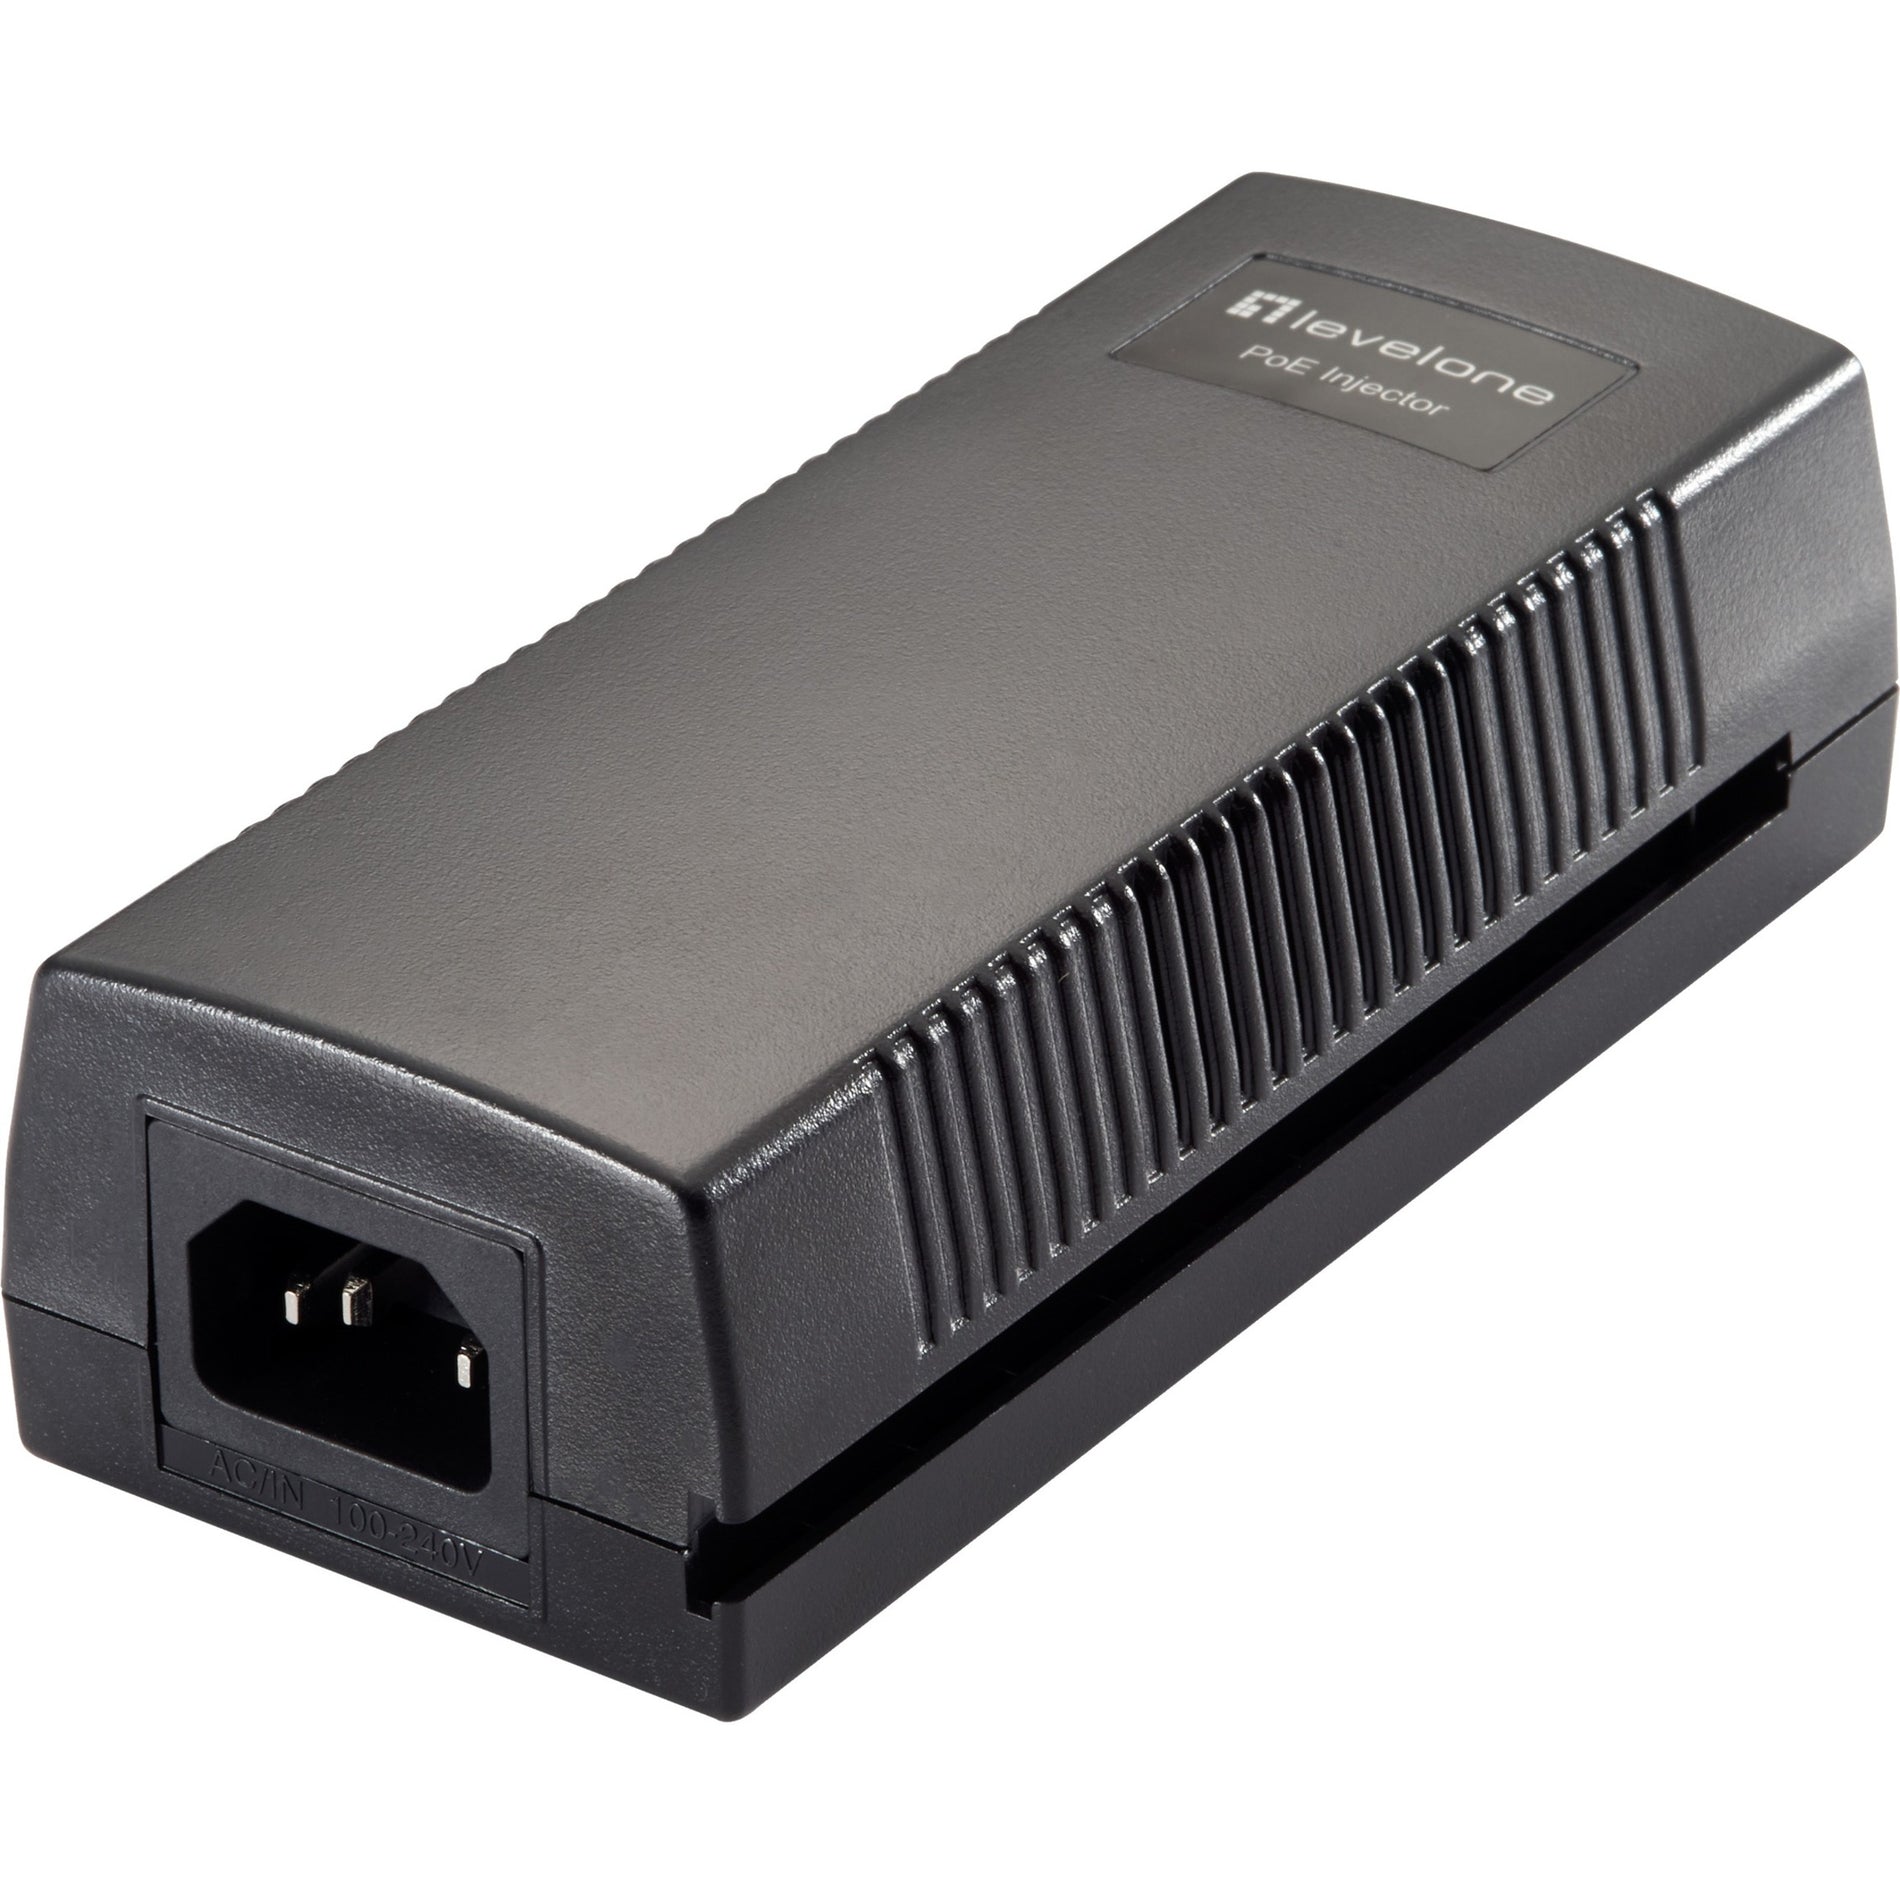 LevelOne POI-3014 Gigabit PoE Injector, 30W - Power Over Ethernet for Efficient Network Connectivity